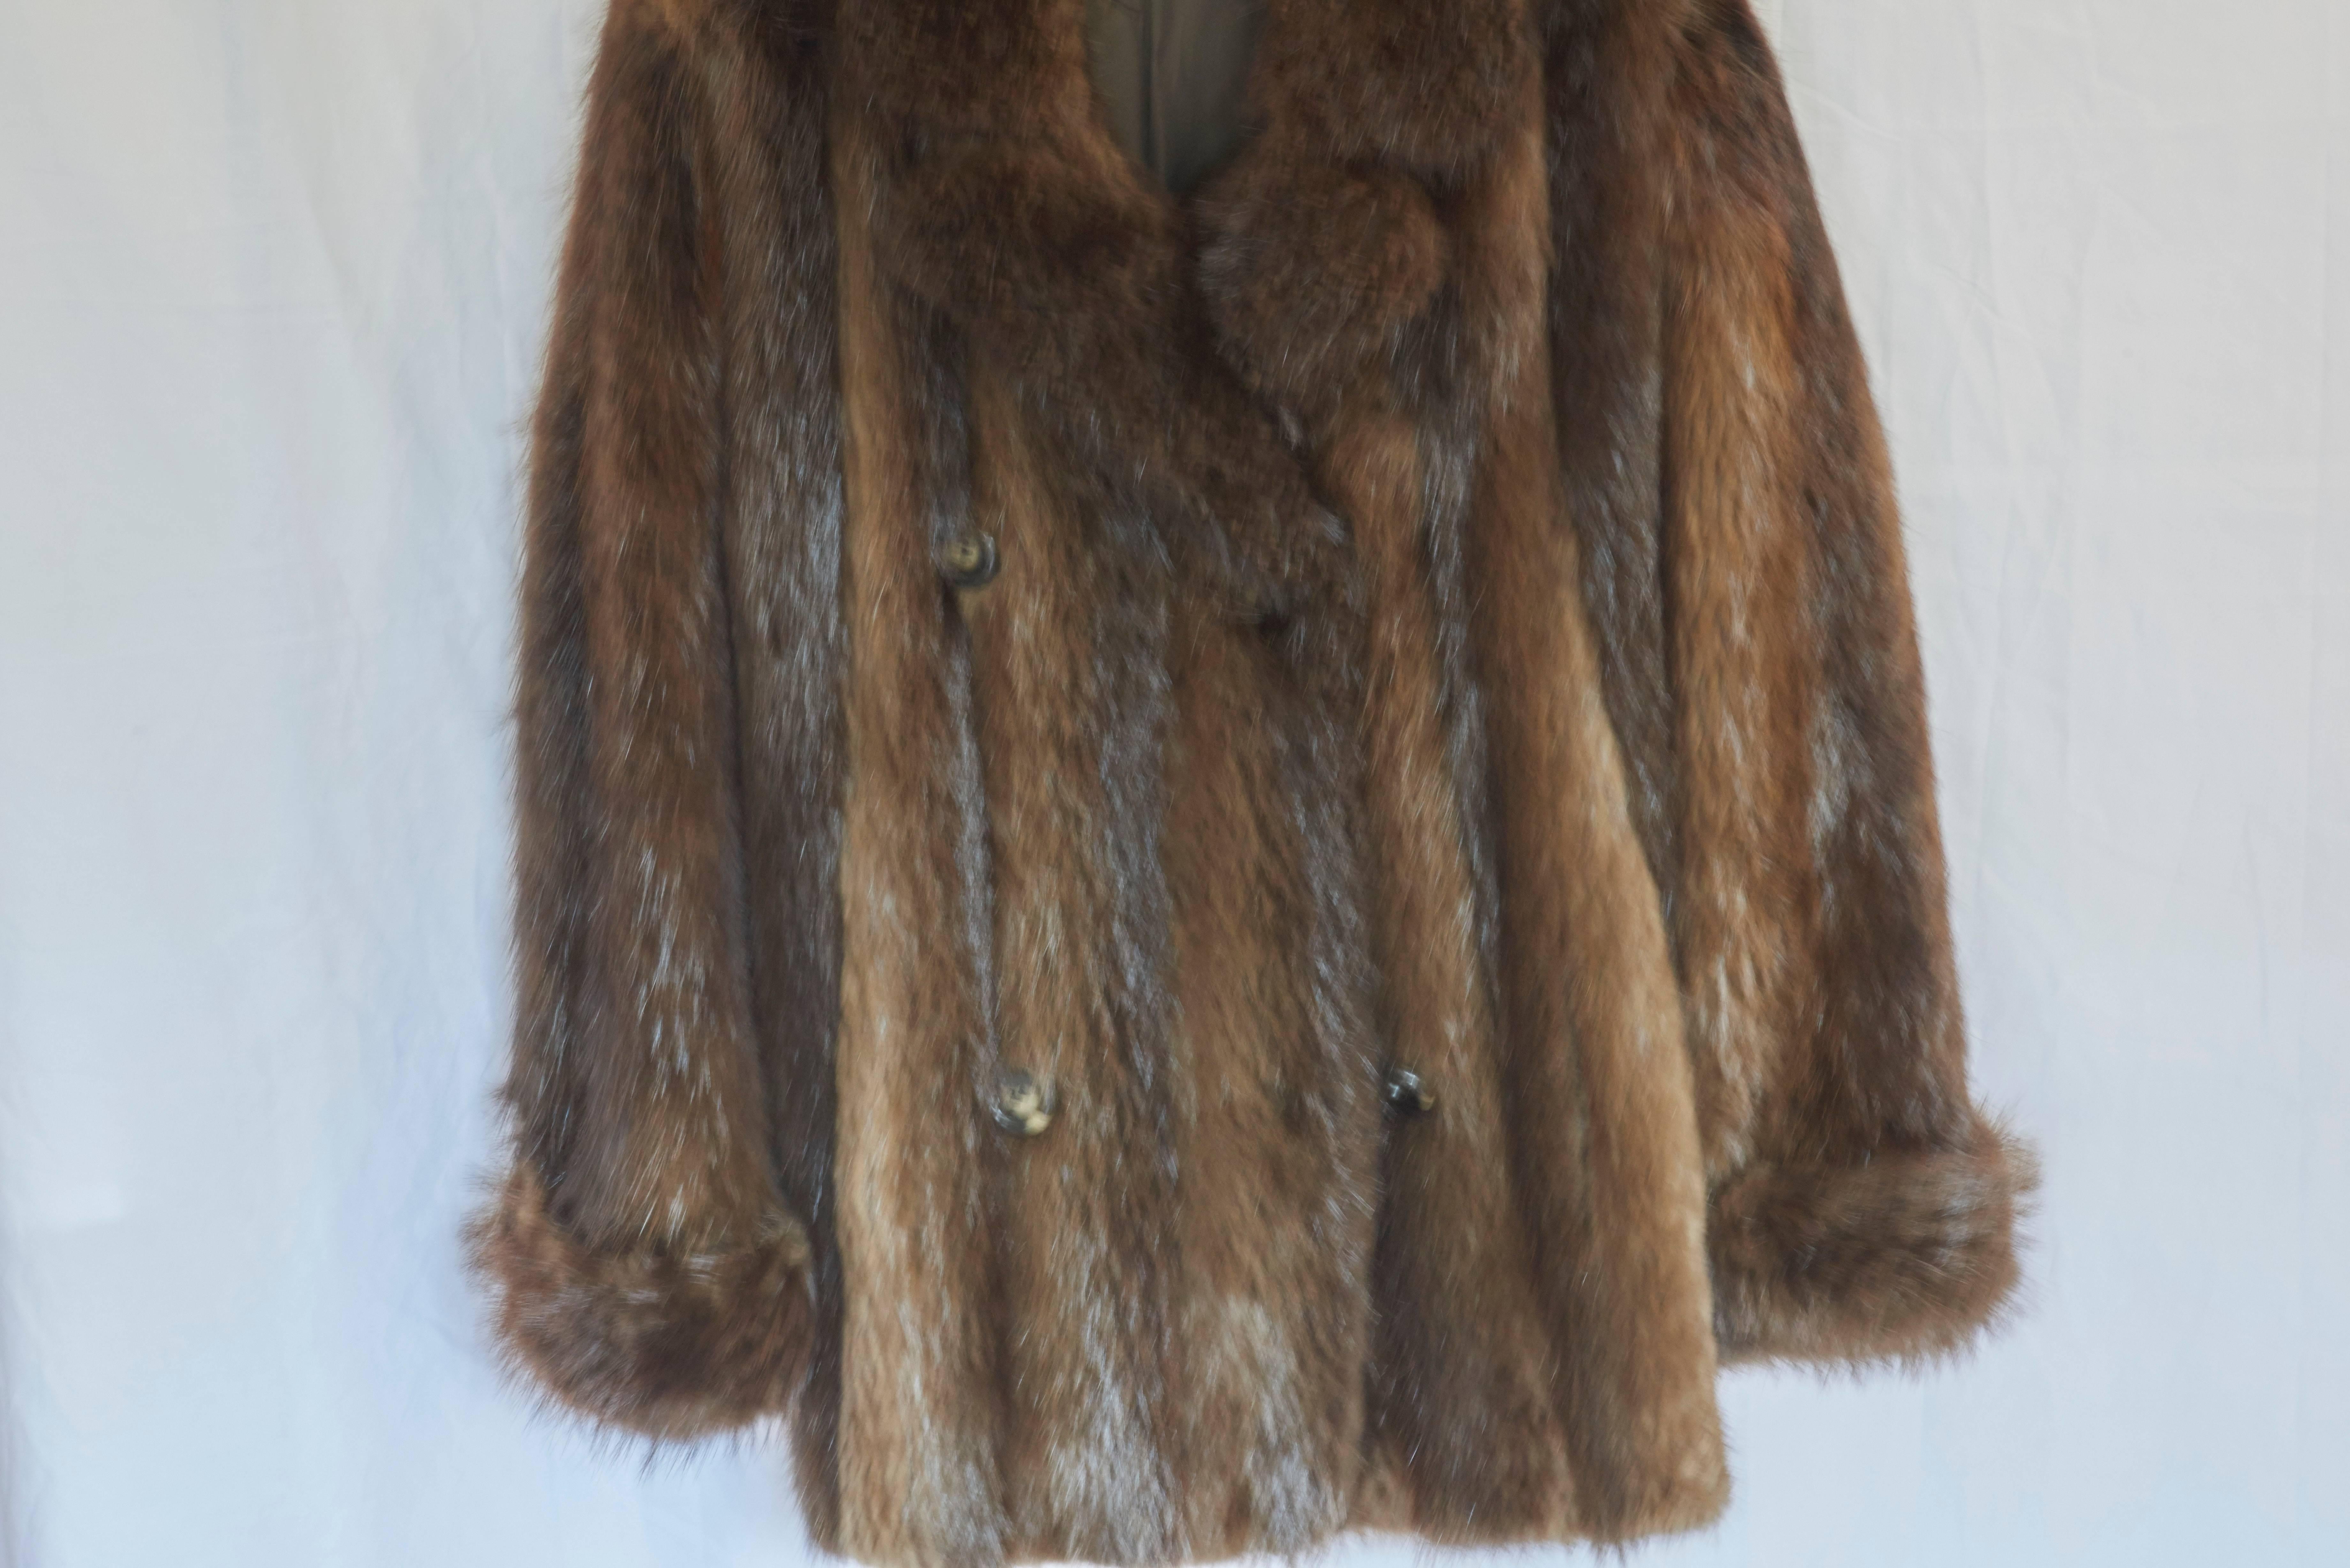 Reduced to 350!!! Long haired beaver jacket, beautiful colors, great condition. Probably a size 8-10. The owner of this jacket paid $10,000. This coat is a fantastic price point and looks stunning on.